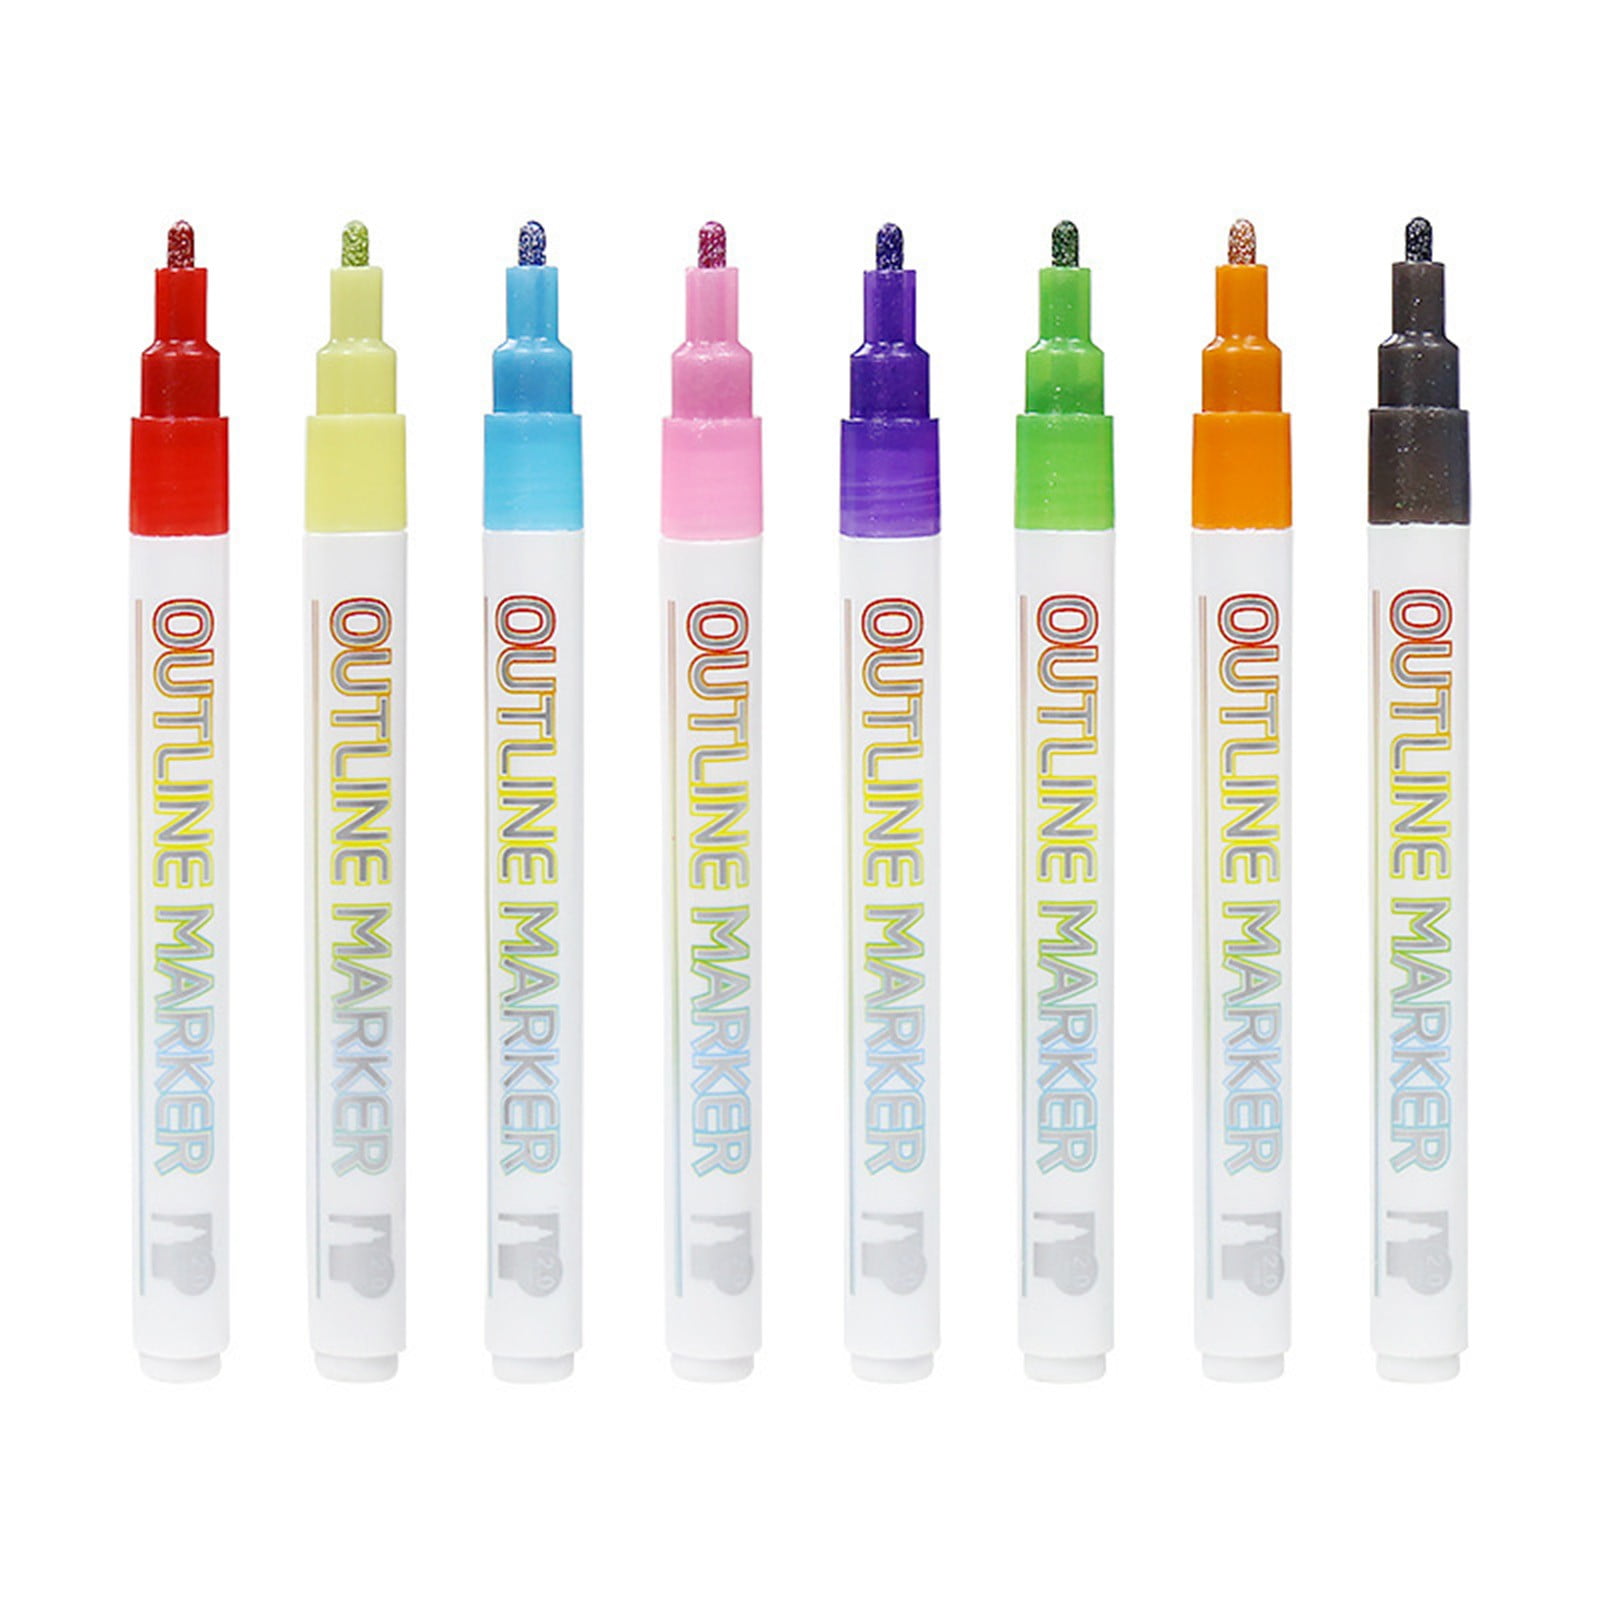 TEOYALL Self-Outline Markers, 12 Color Double Line Outline Pens Metallic  Permanent Pens for Painting Drawing Gift Cards